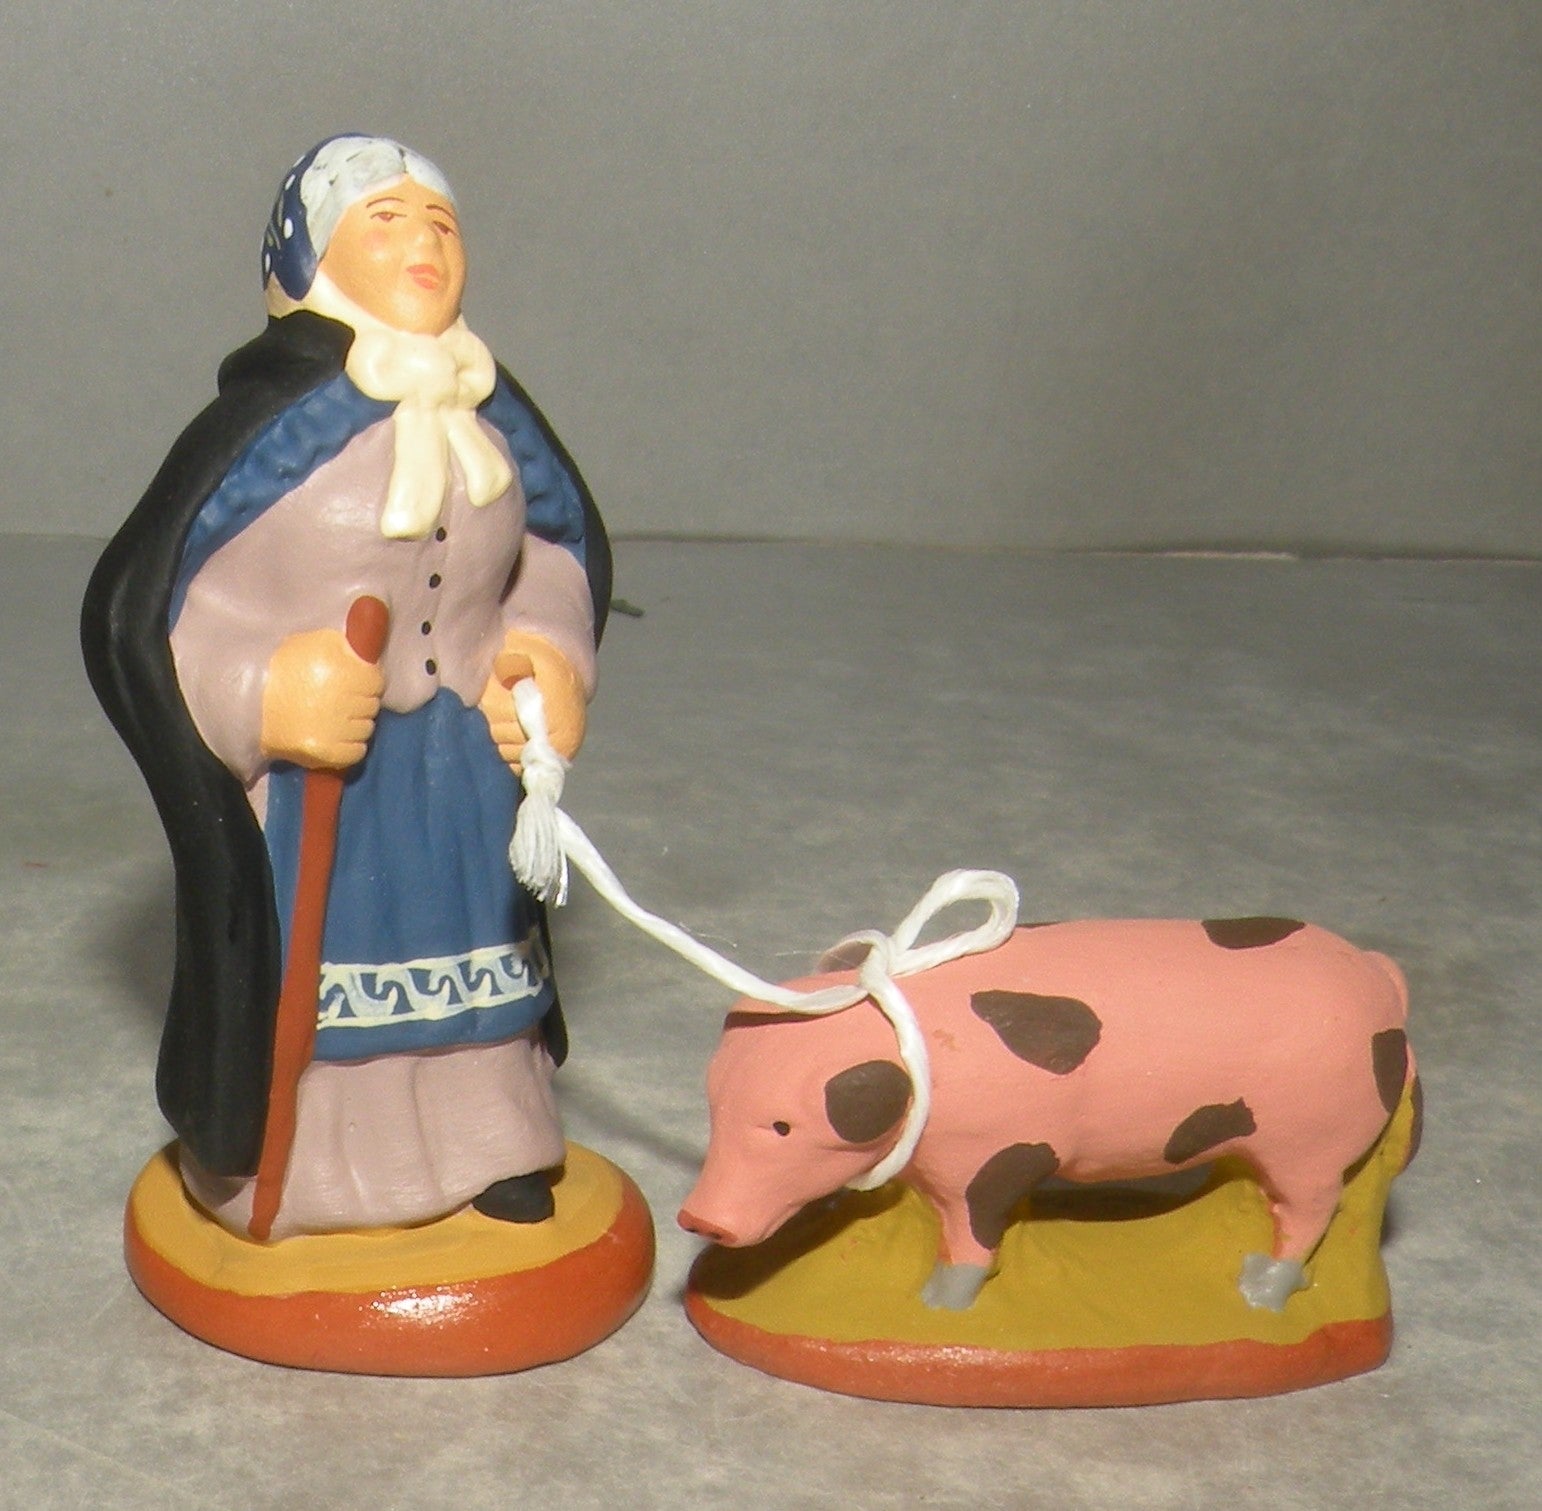 Aunt Adeline with her Pig, Fouque, 6 cm